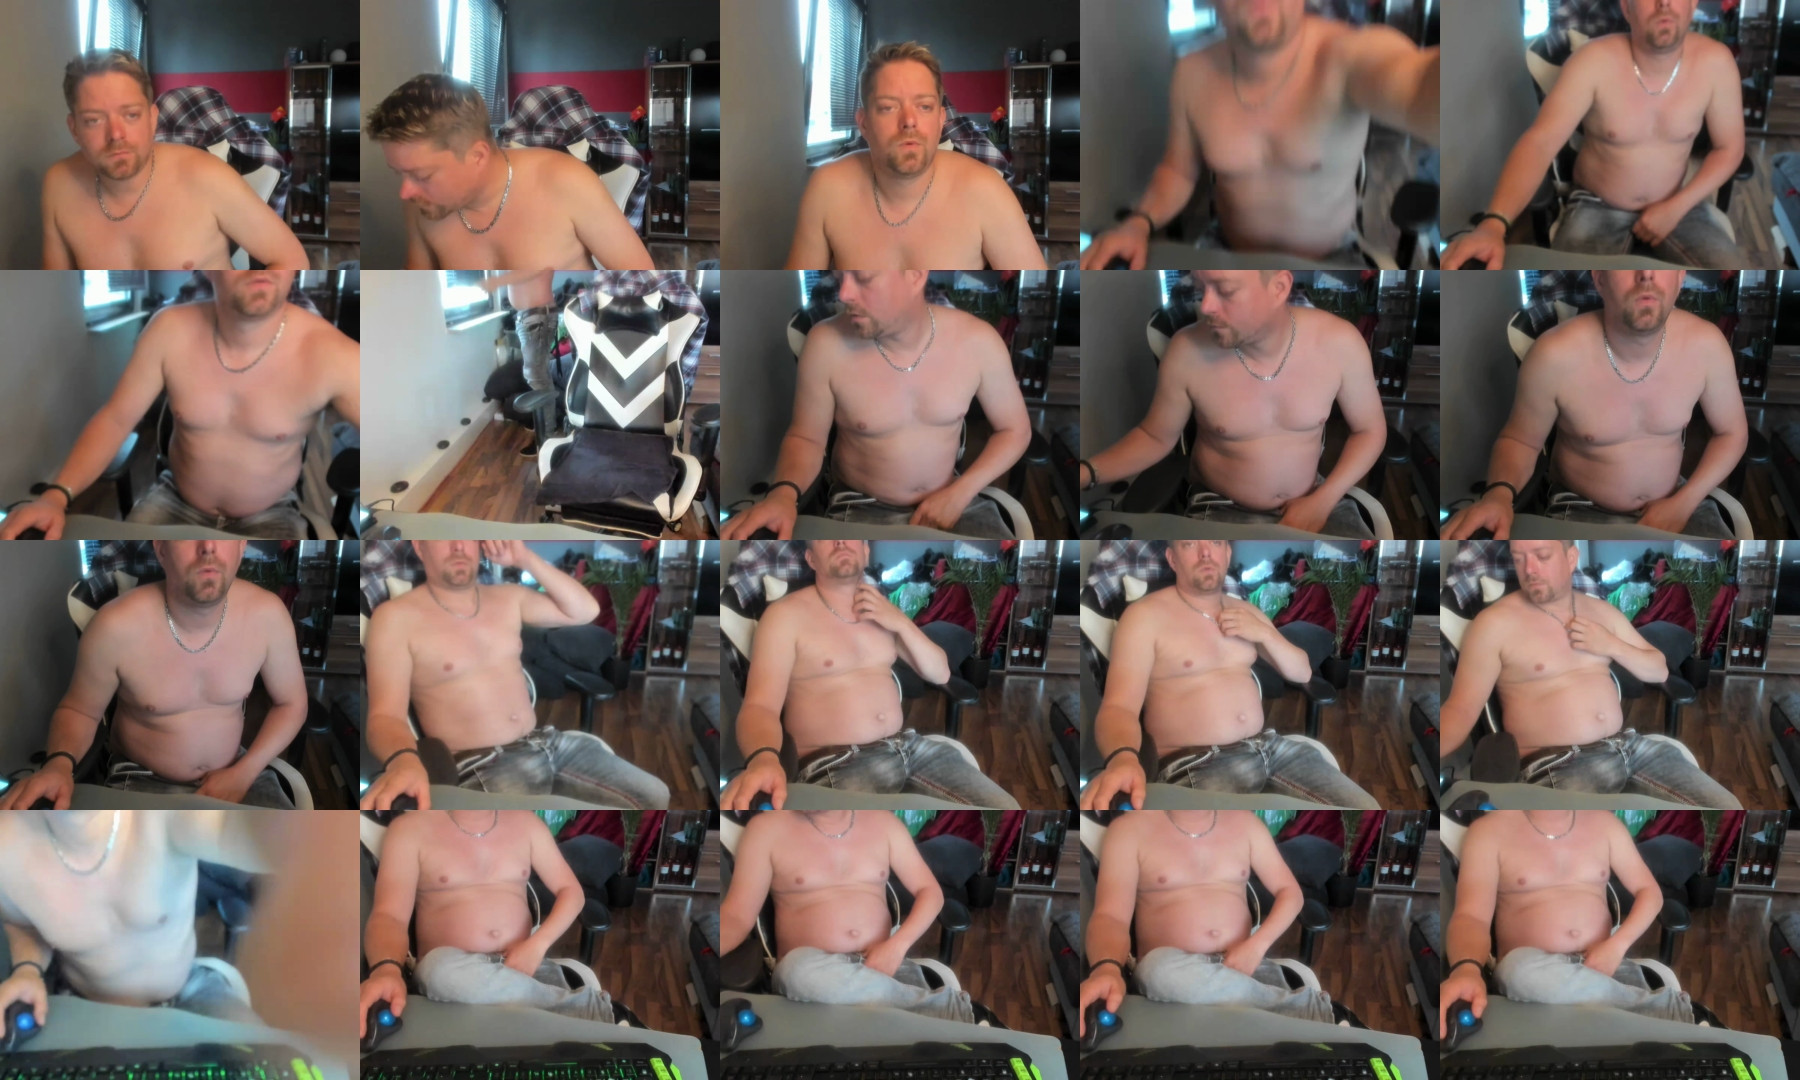 Geil32hb  29-06-2021 Recorded Video Topless